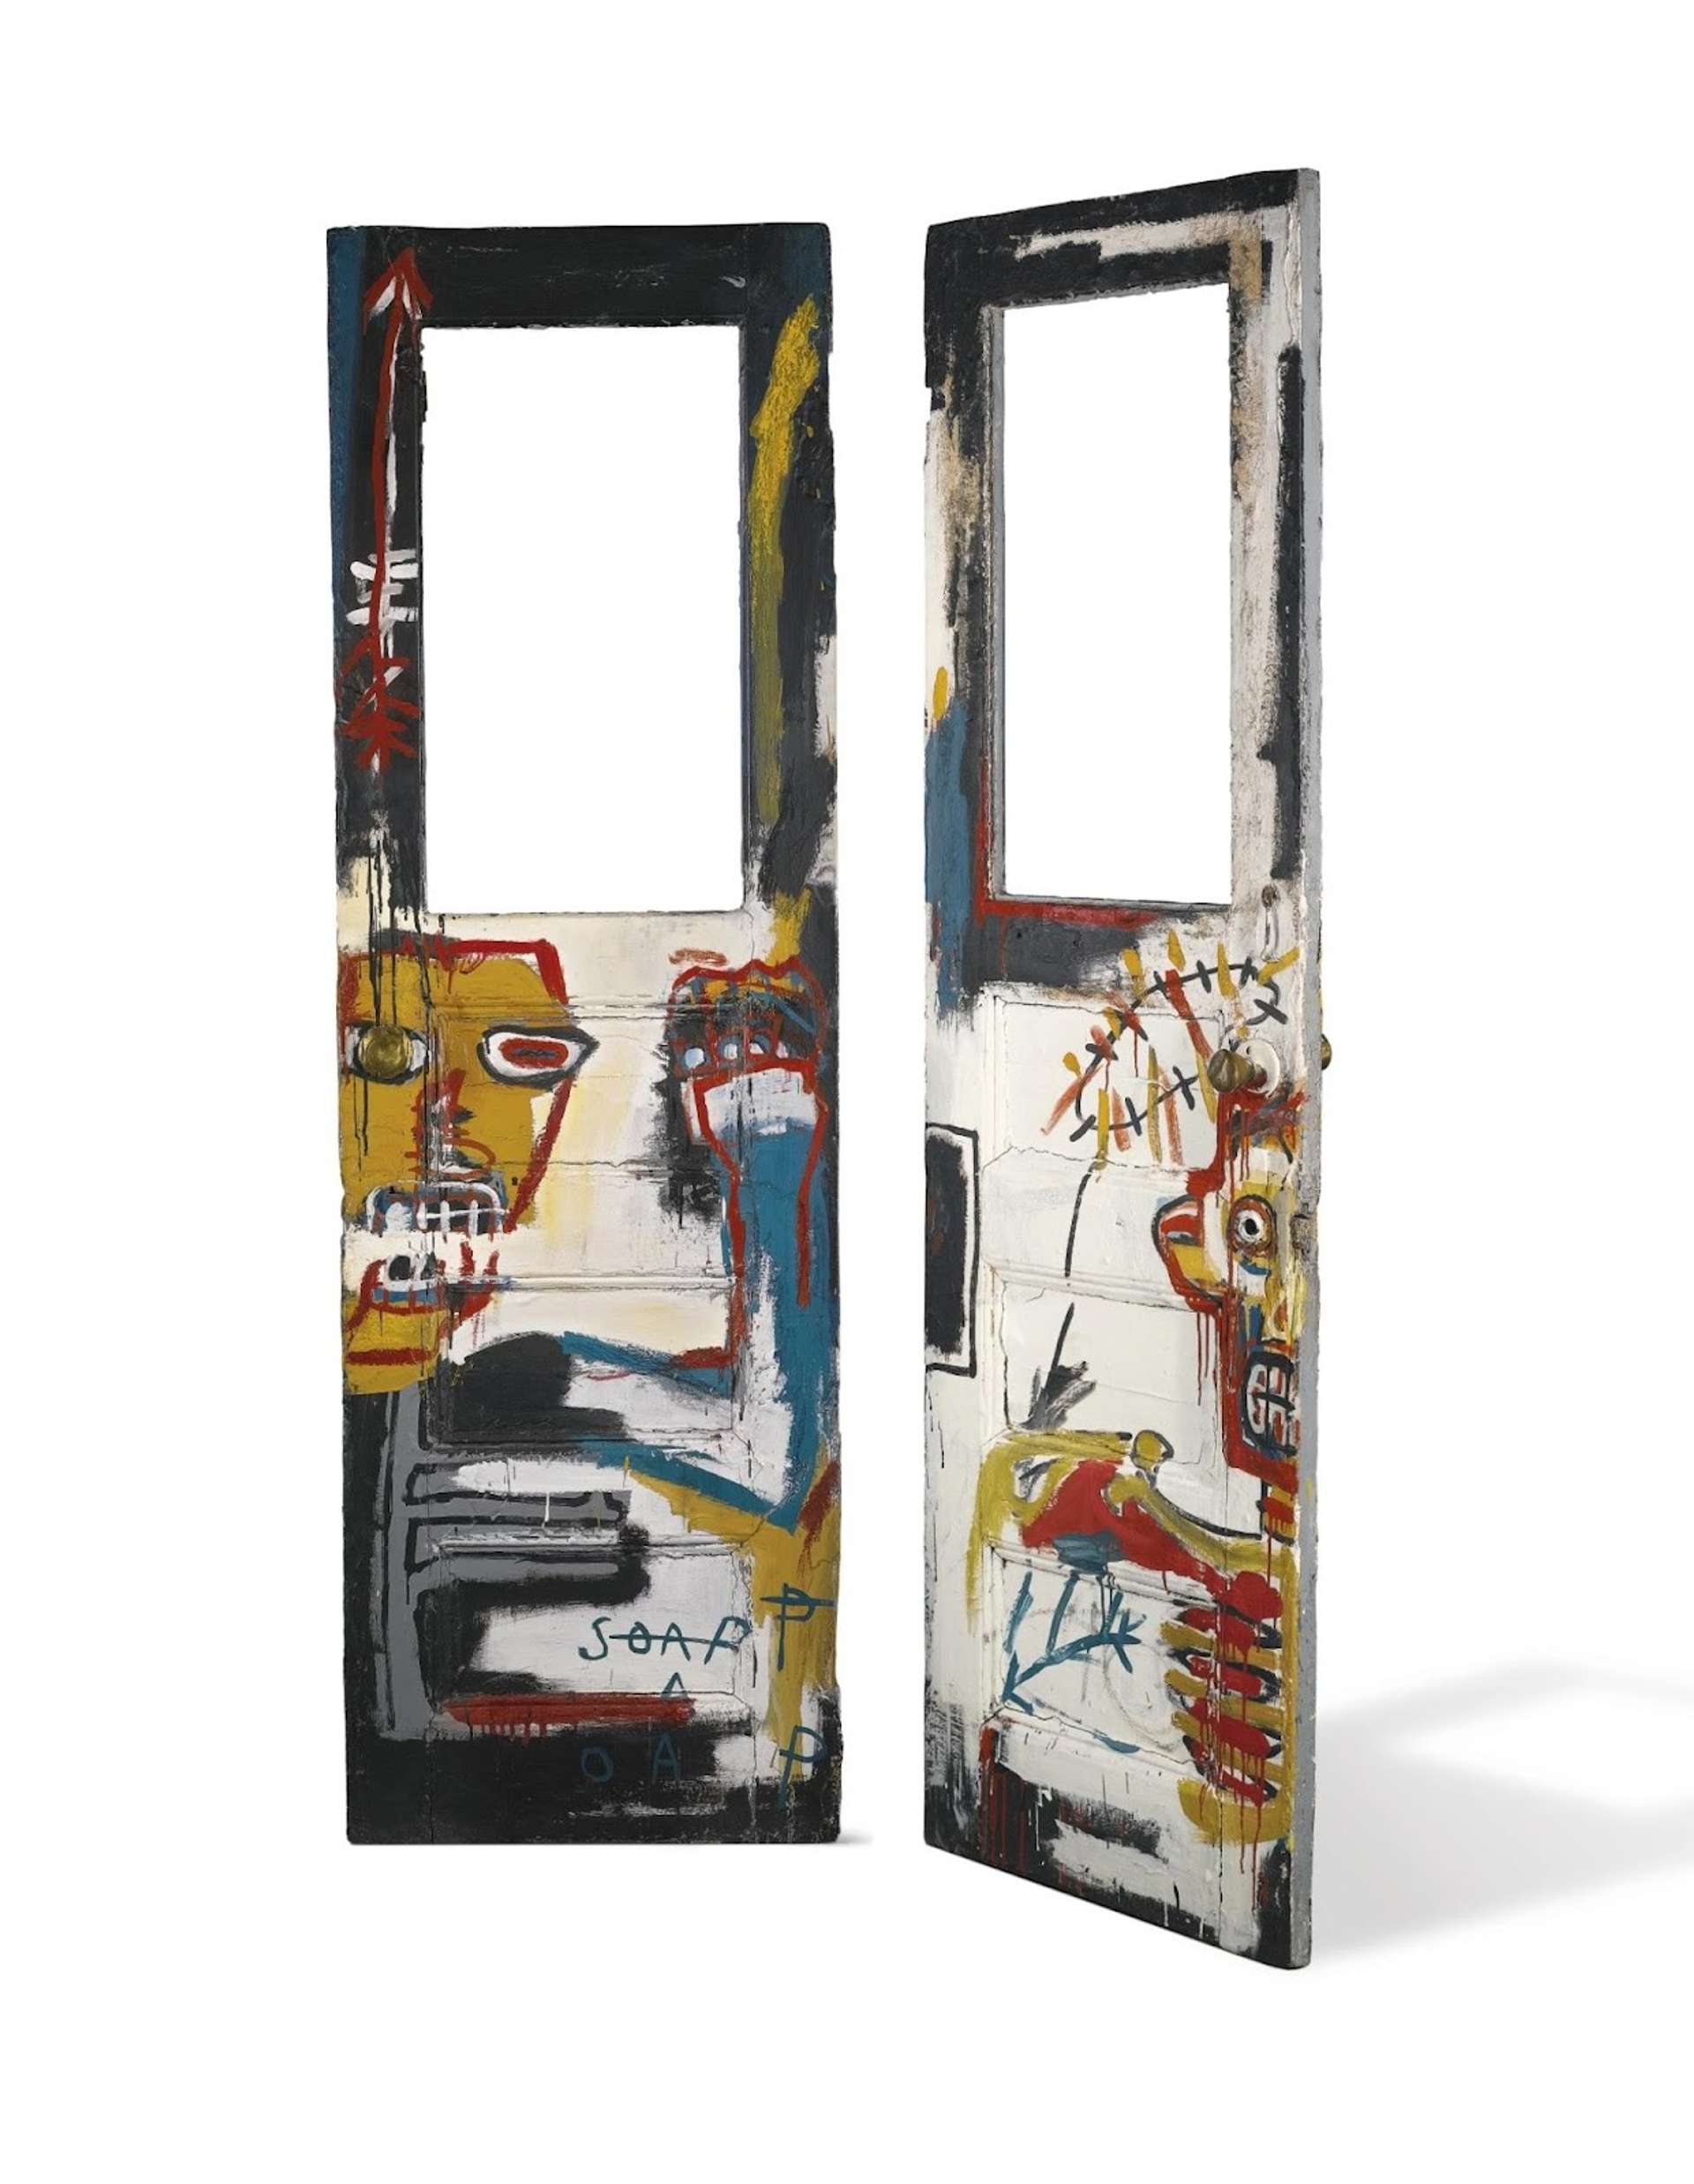 A photograph of the artwork Untitled by Jean-Michel Basquiat, executed on a wooden door. It features some of his signature figures, depicted in red, blue and yellow.